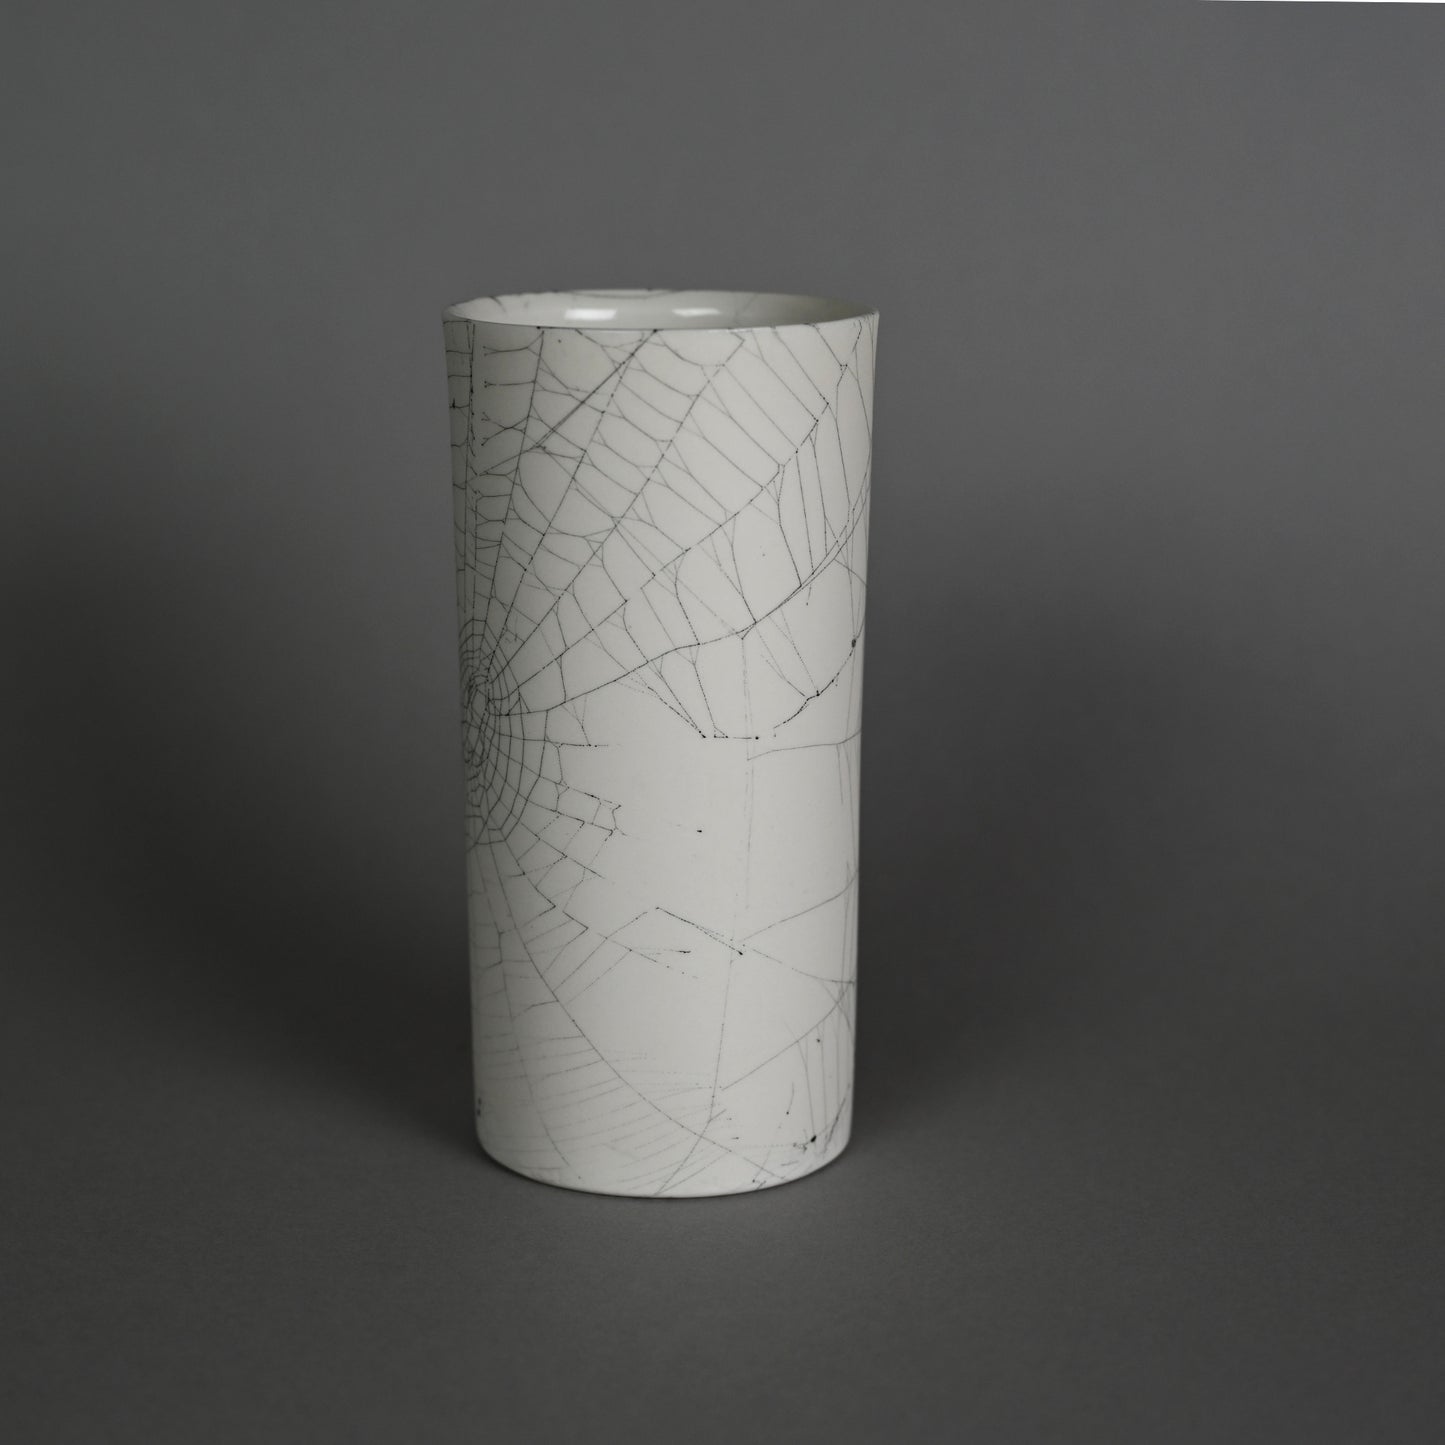 Web on Clay (187), Collected September 24, 2022